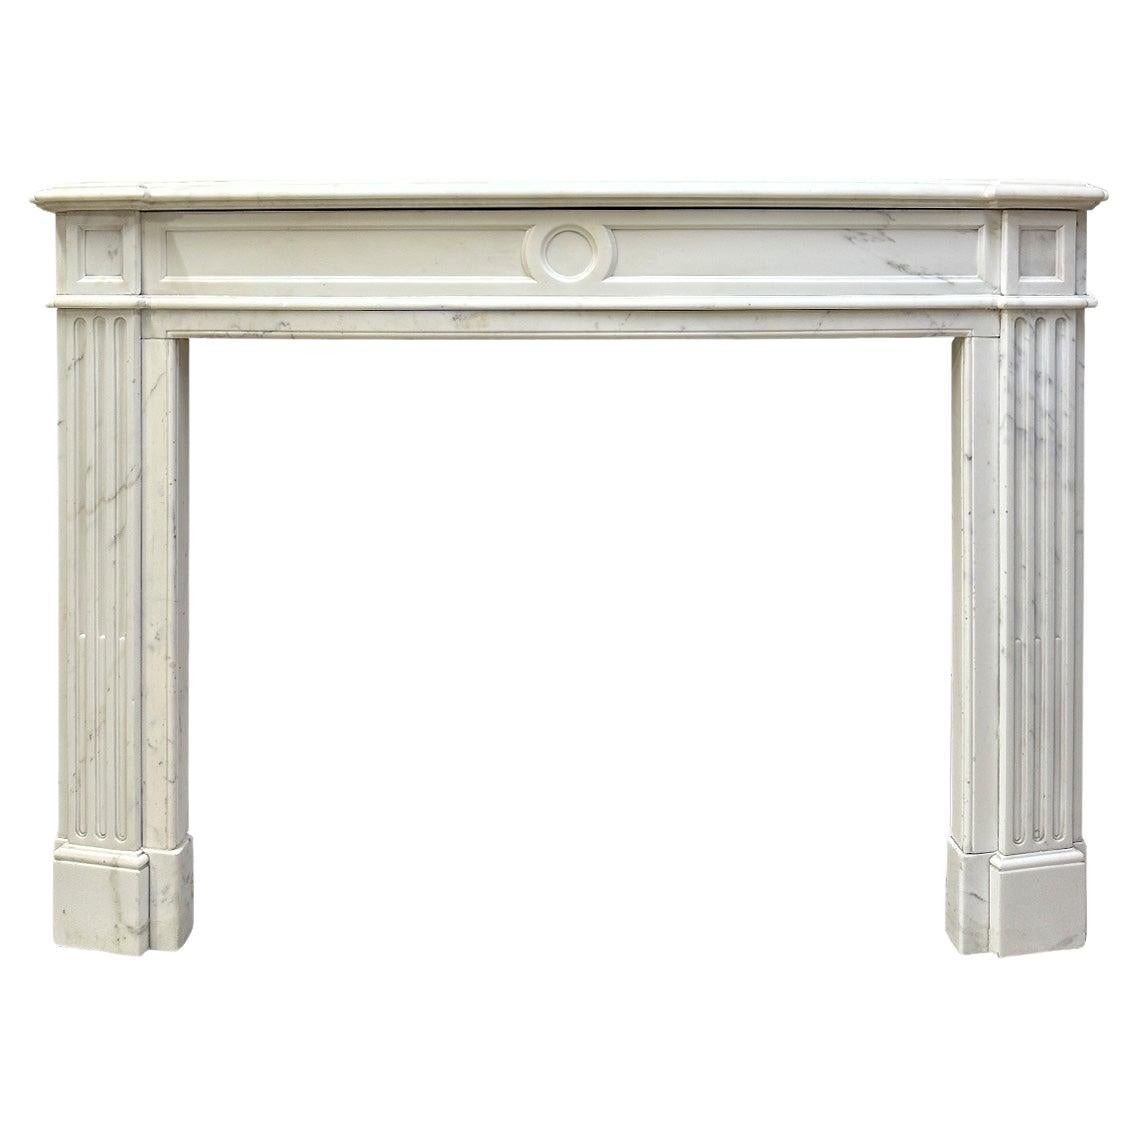 An Antique French Statuary White Marble Louis XVI Style Fireplace mantel For Sale